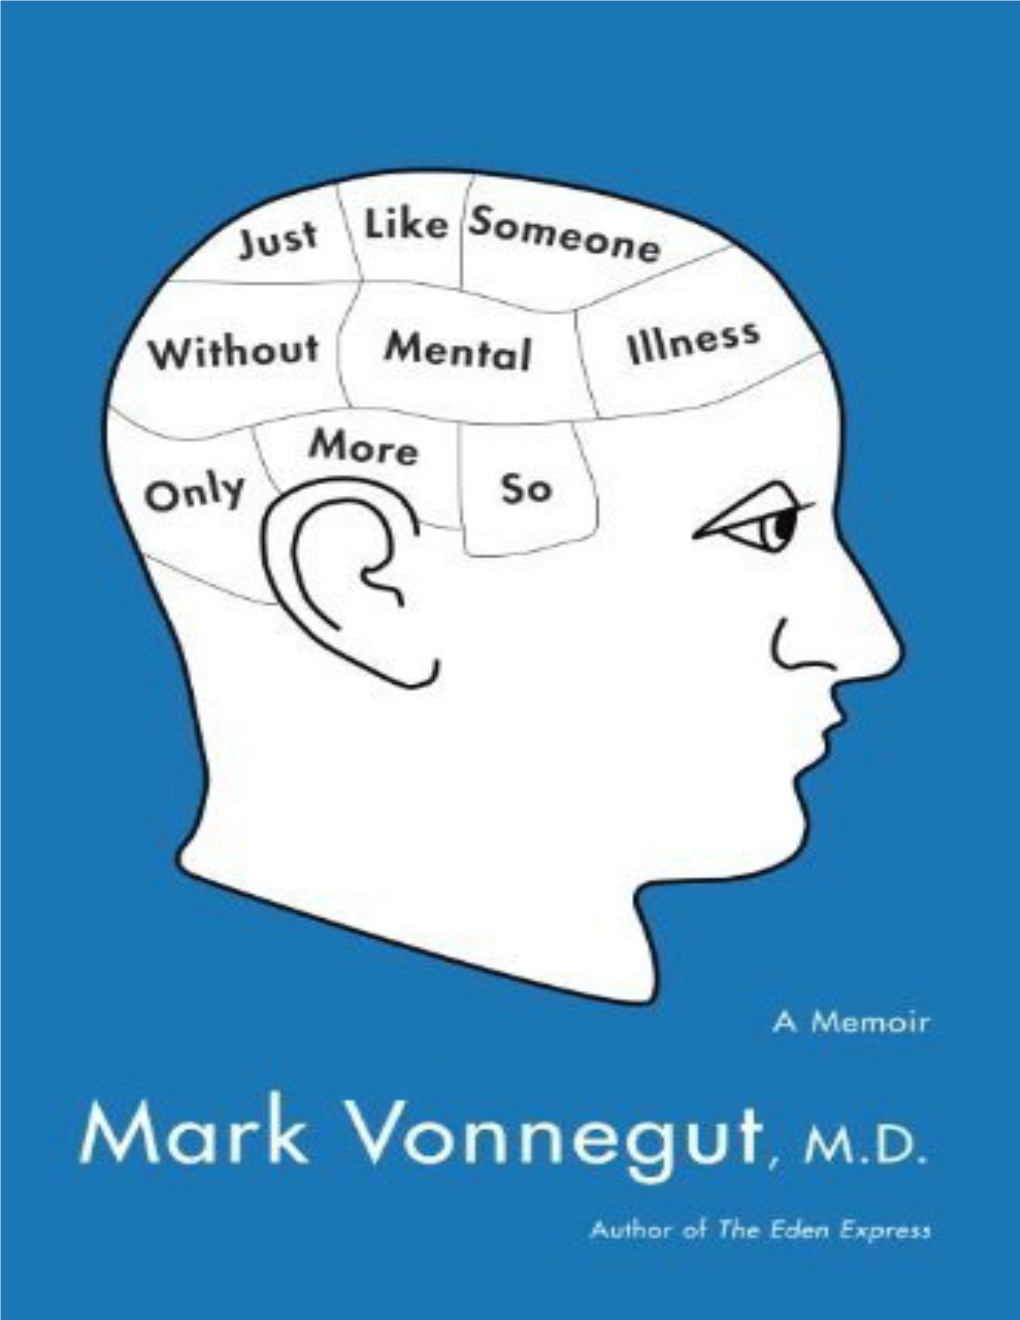 Just Like Someone Without Mental Illness Only More So: a Memoir / Mark Vonnegut